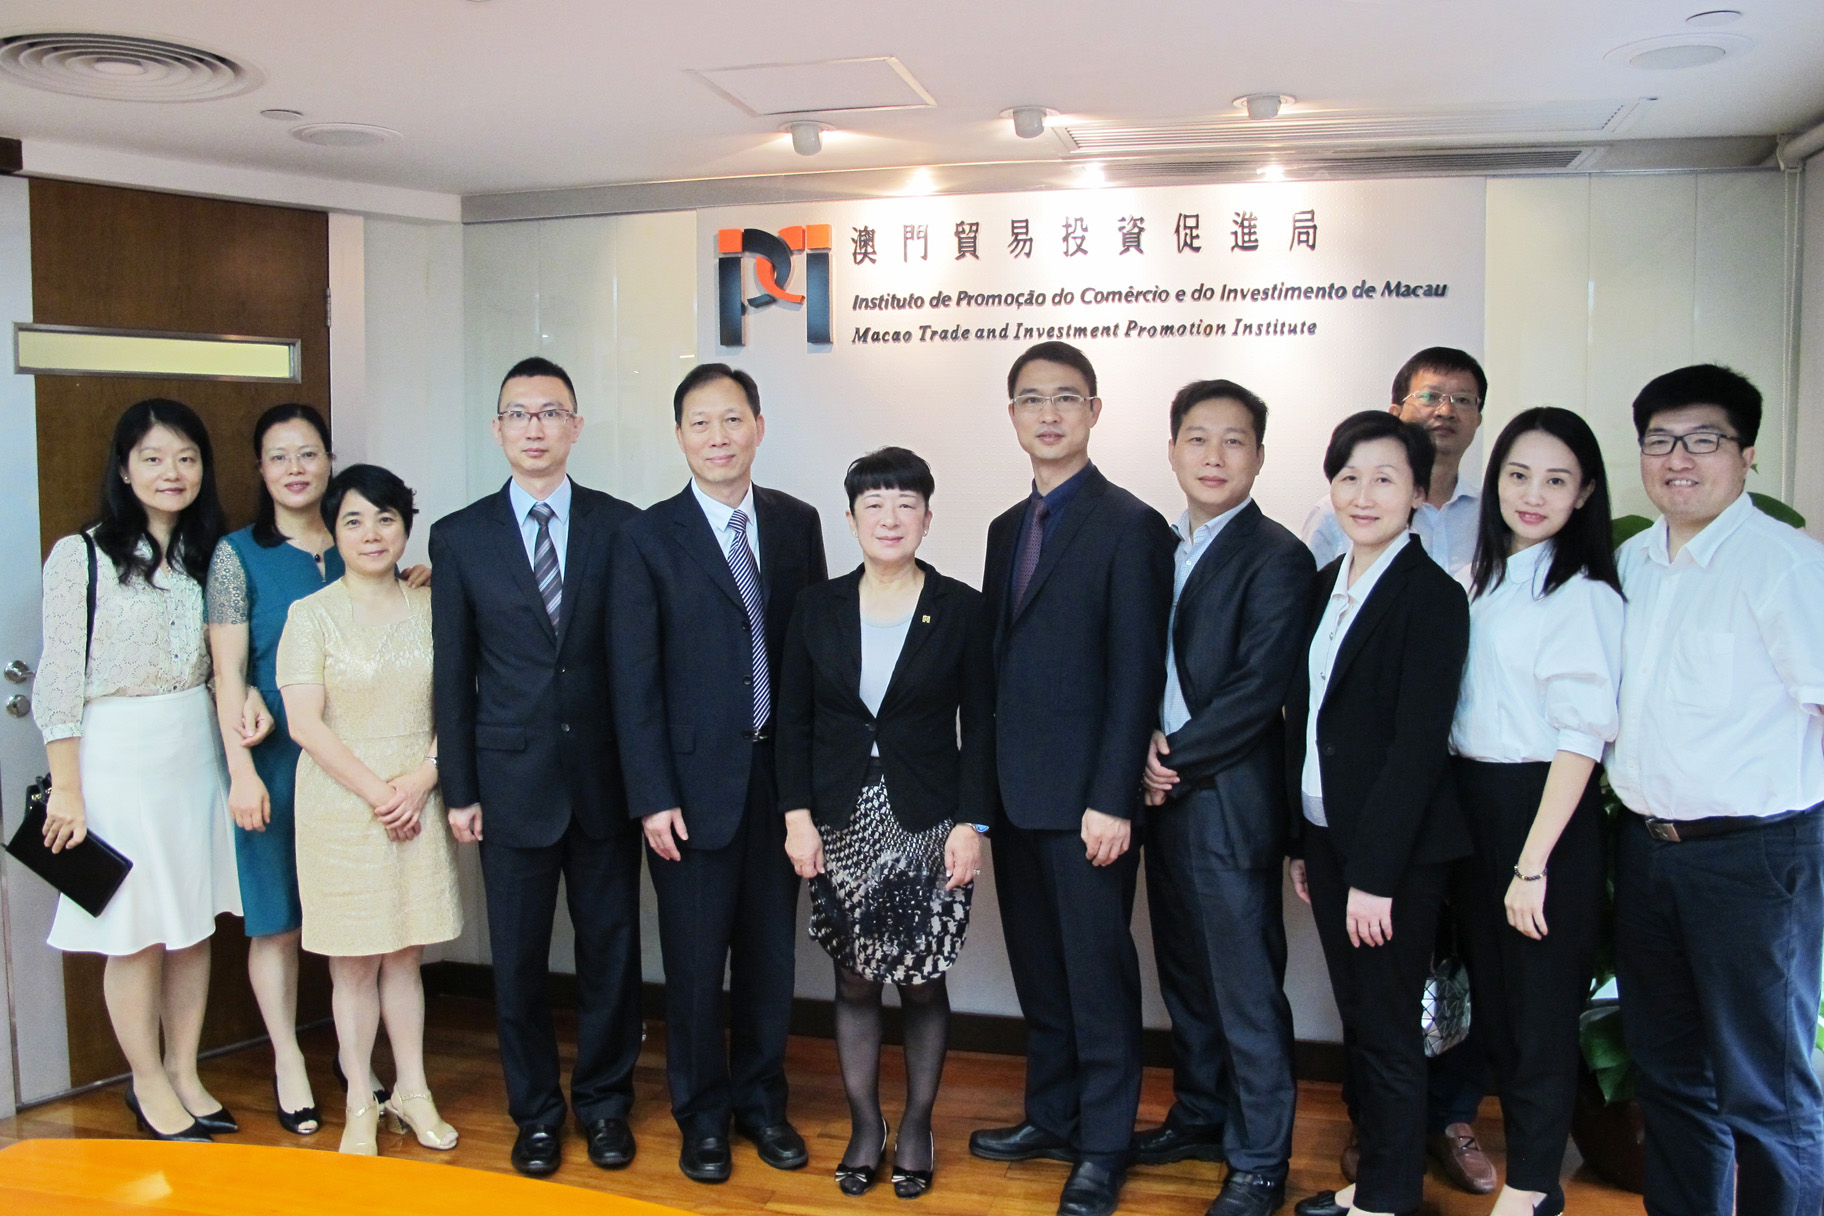 IPIM’s Executive Director Irene V. K. Lau with Vice General-Director of the Fujian Provincial Department of Commerce Huang Dezhi and the delegation at IPIM (19 June 2017)